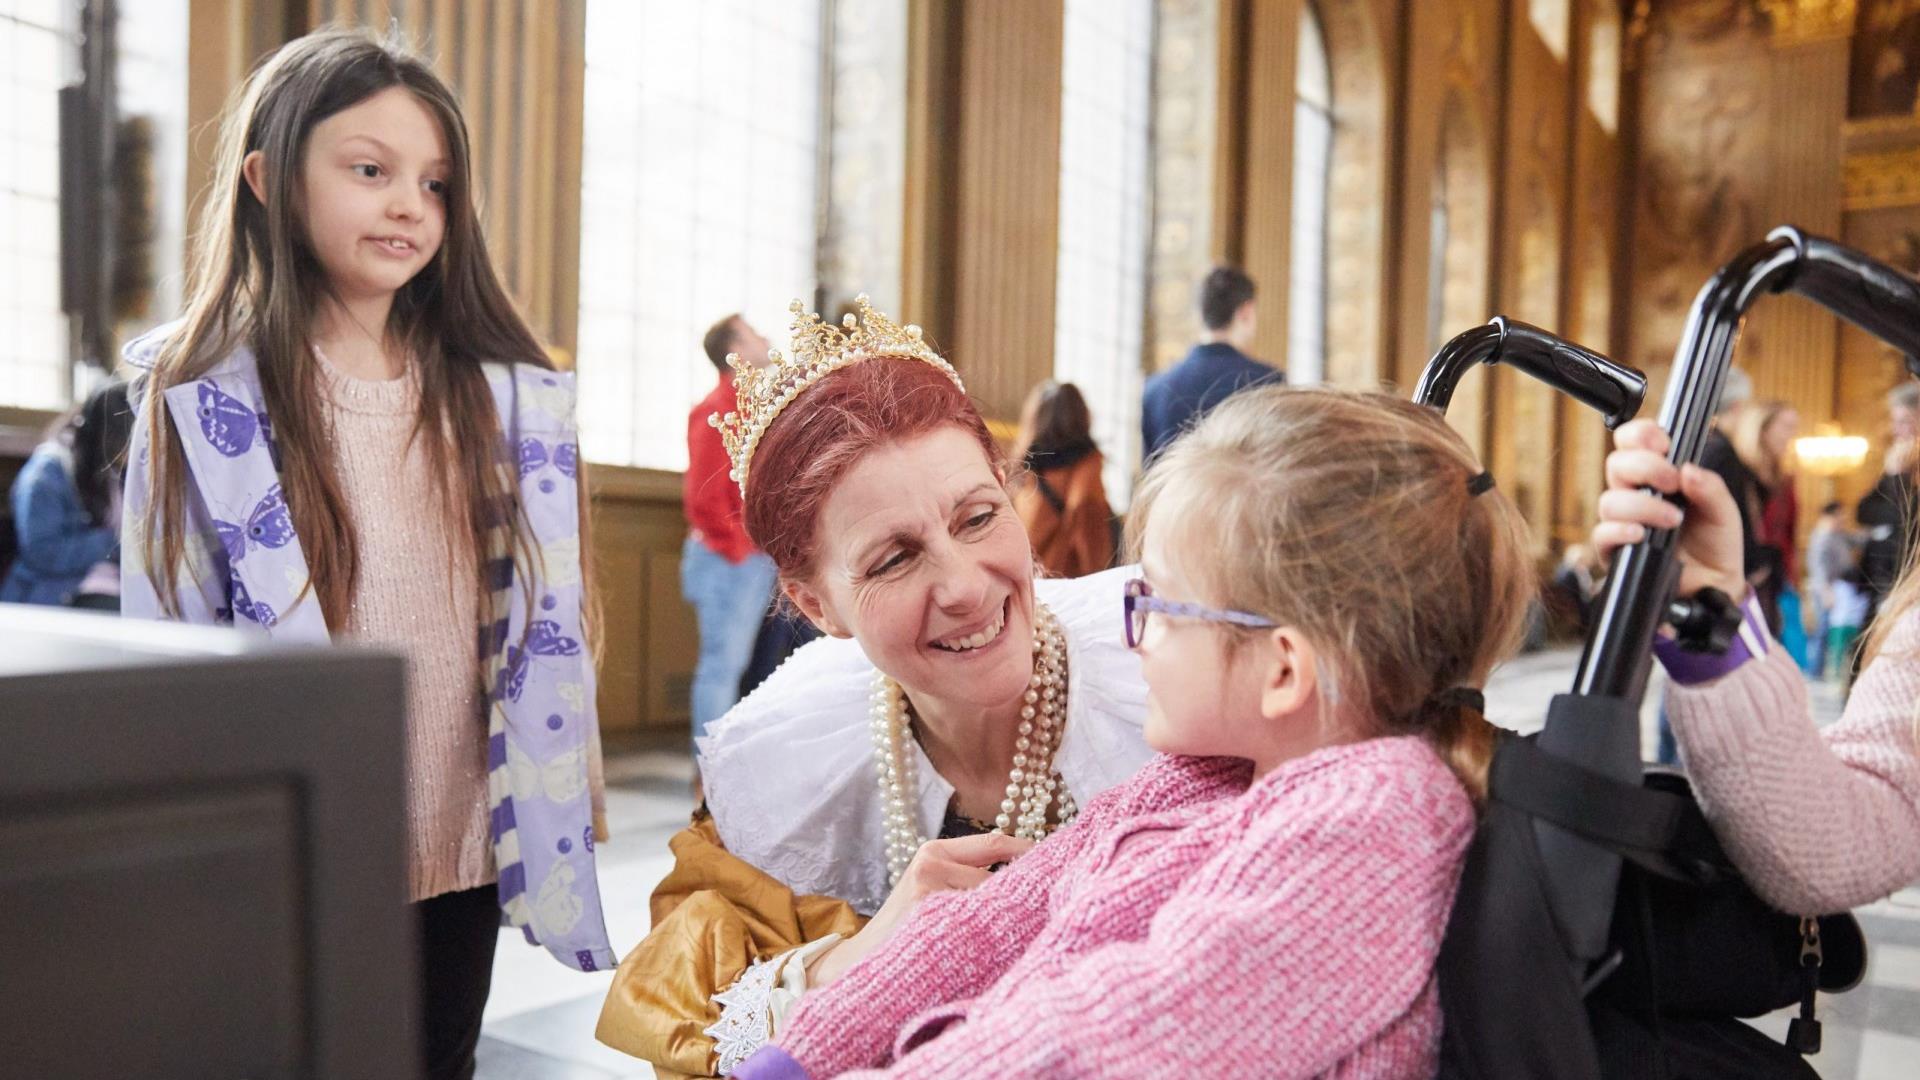 A young girl in a wheelchair is greeted by staff at the Painted Hall at the Old Royal Naval College in Greenwich.